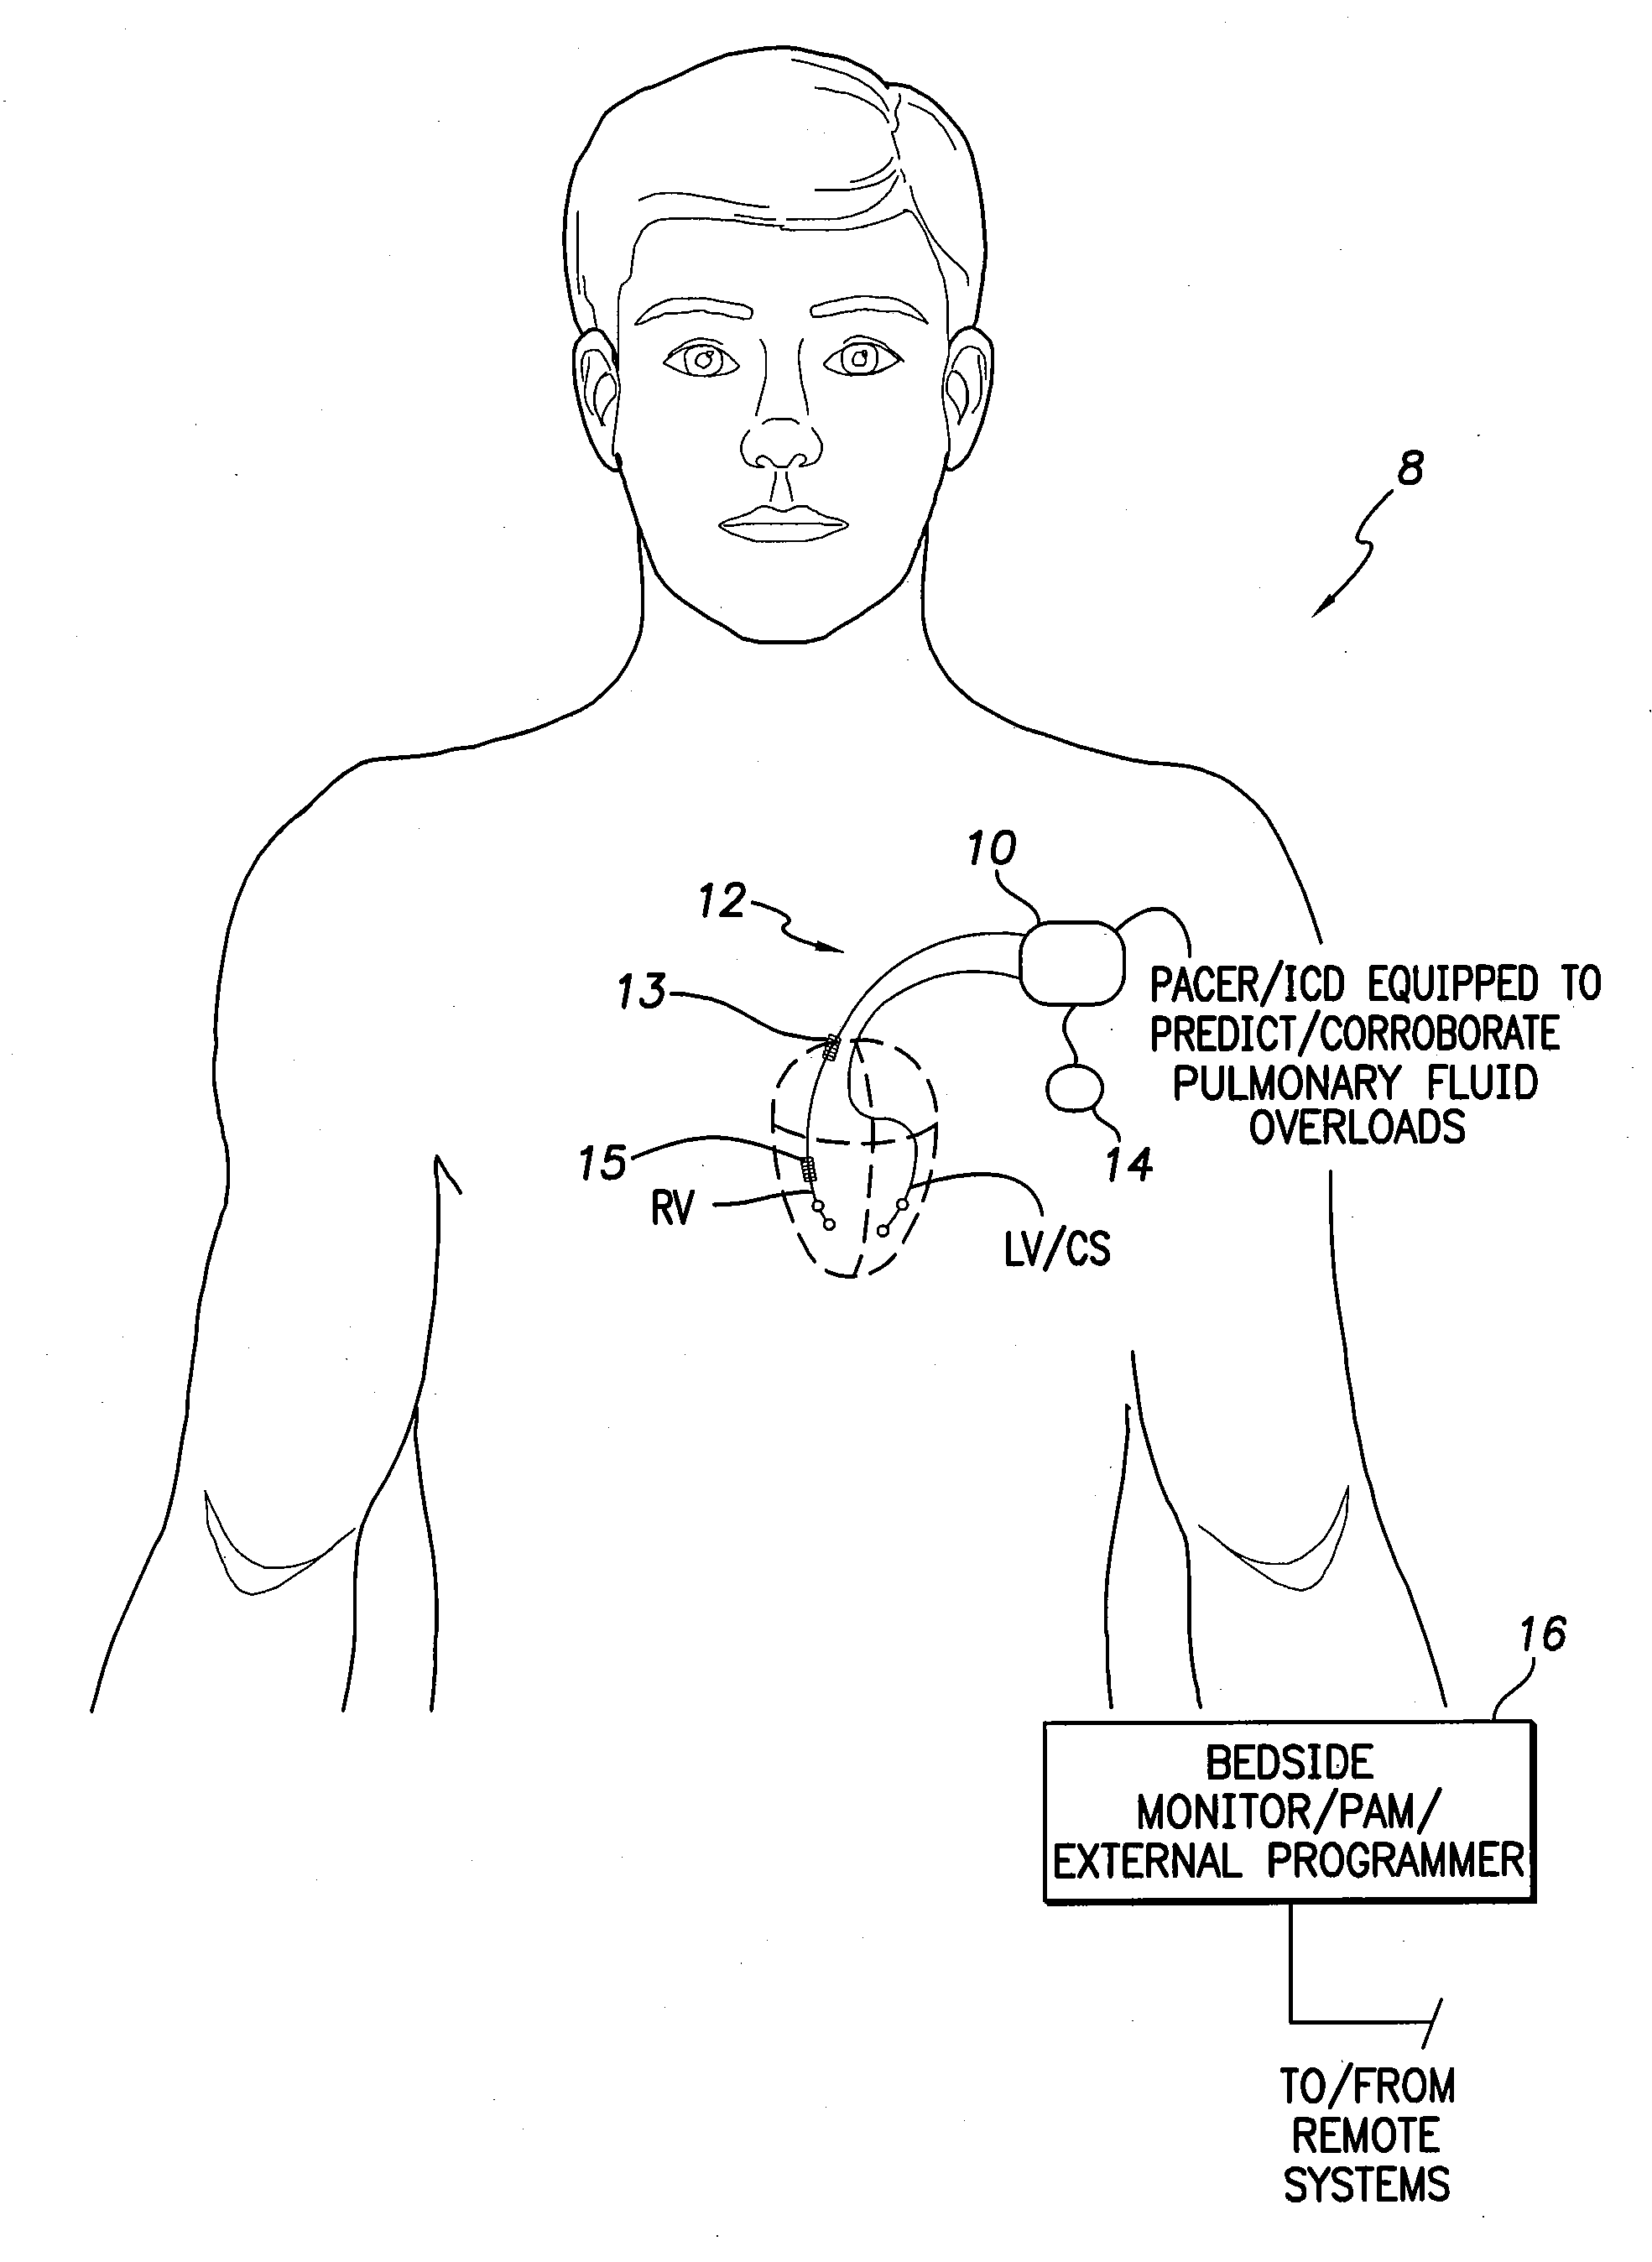 Systems and methods for predicting and corroborating pulmonary fluid overloads using an implantable medical device